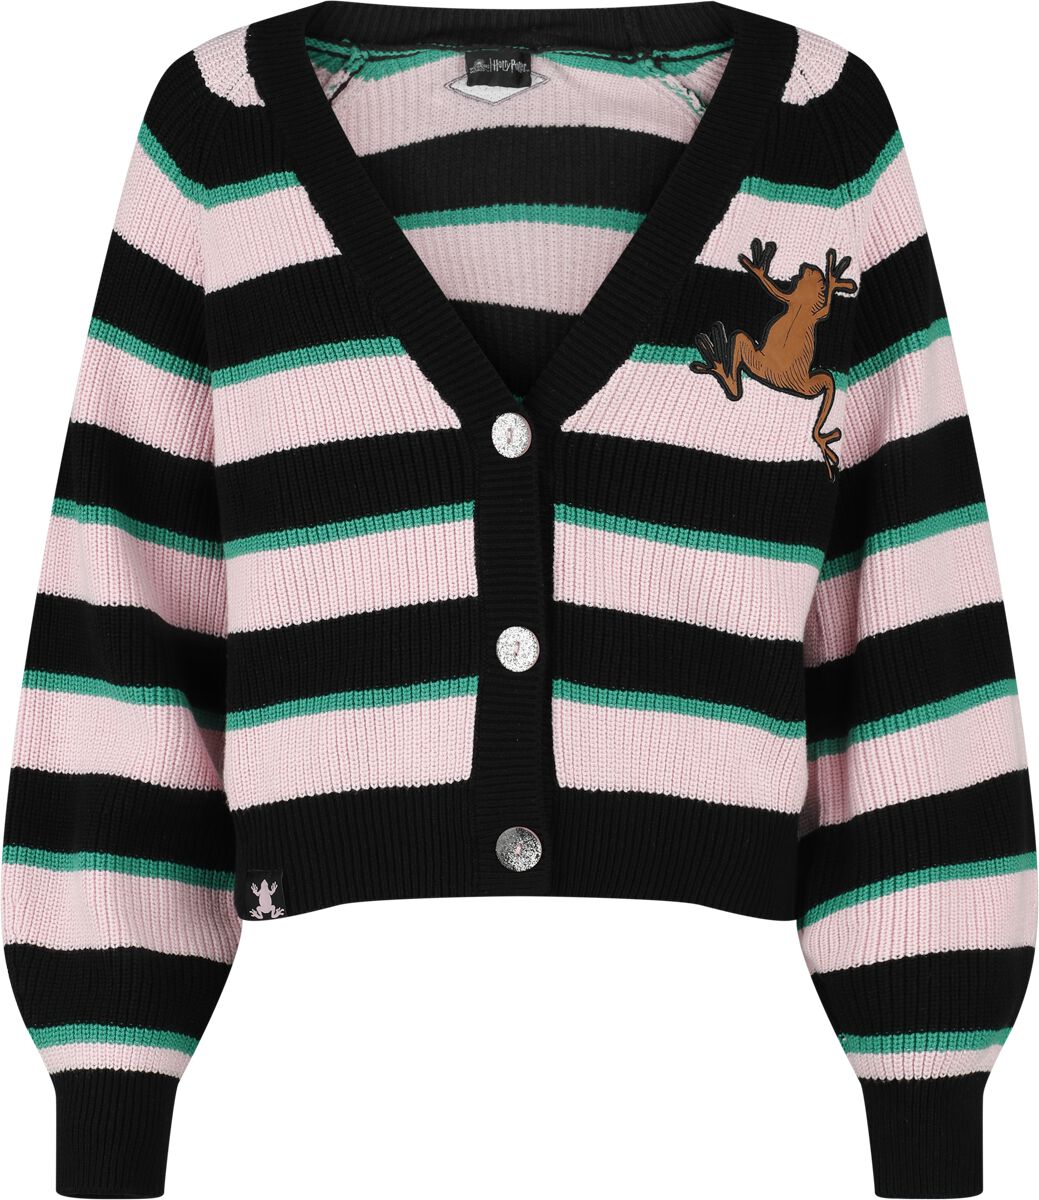 Image of Cardigan di Harry Potter - Honeydukes - S a XXL - Donna - multicolore